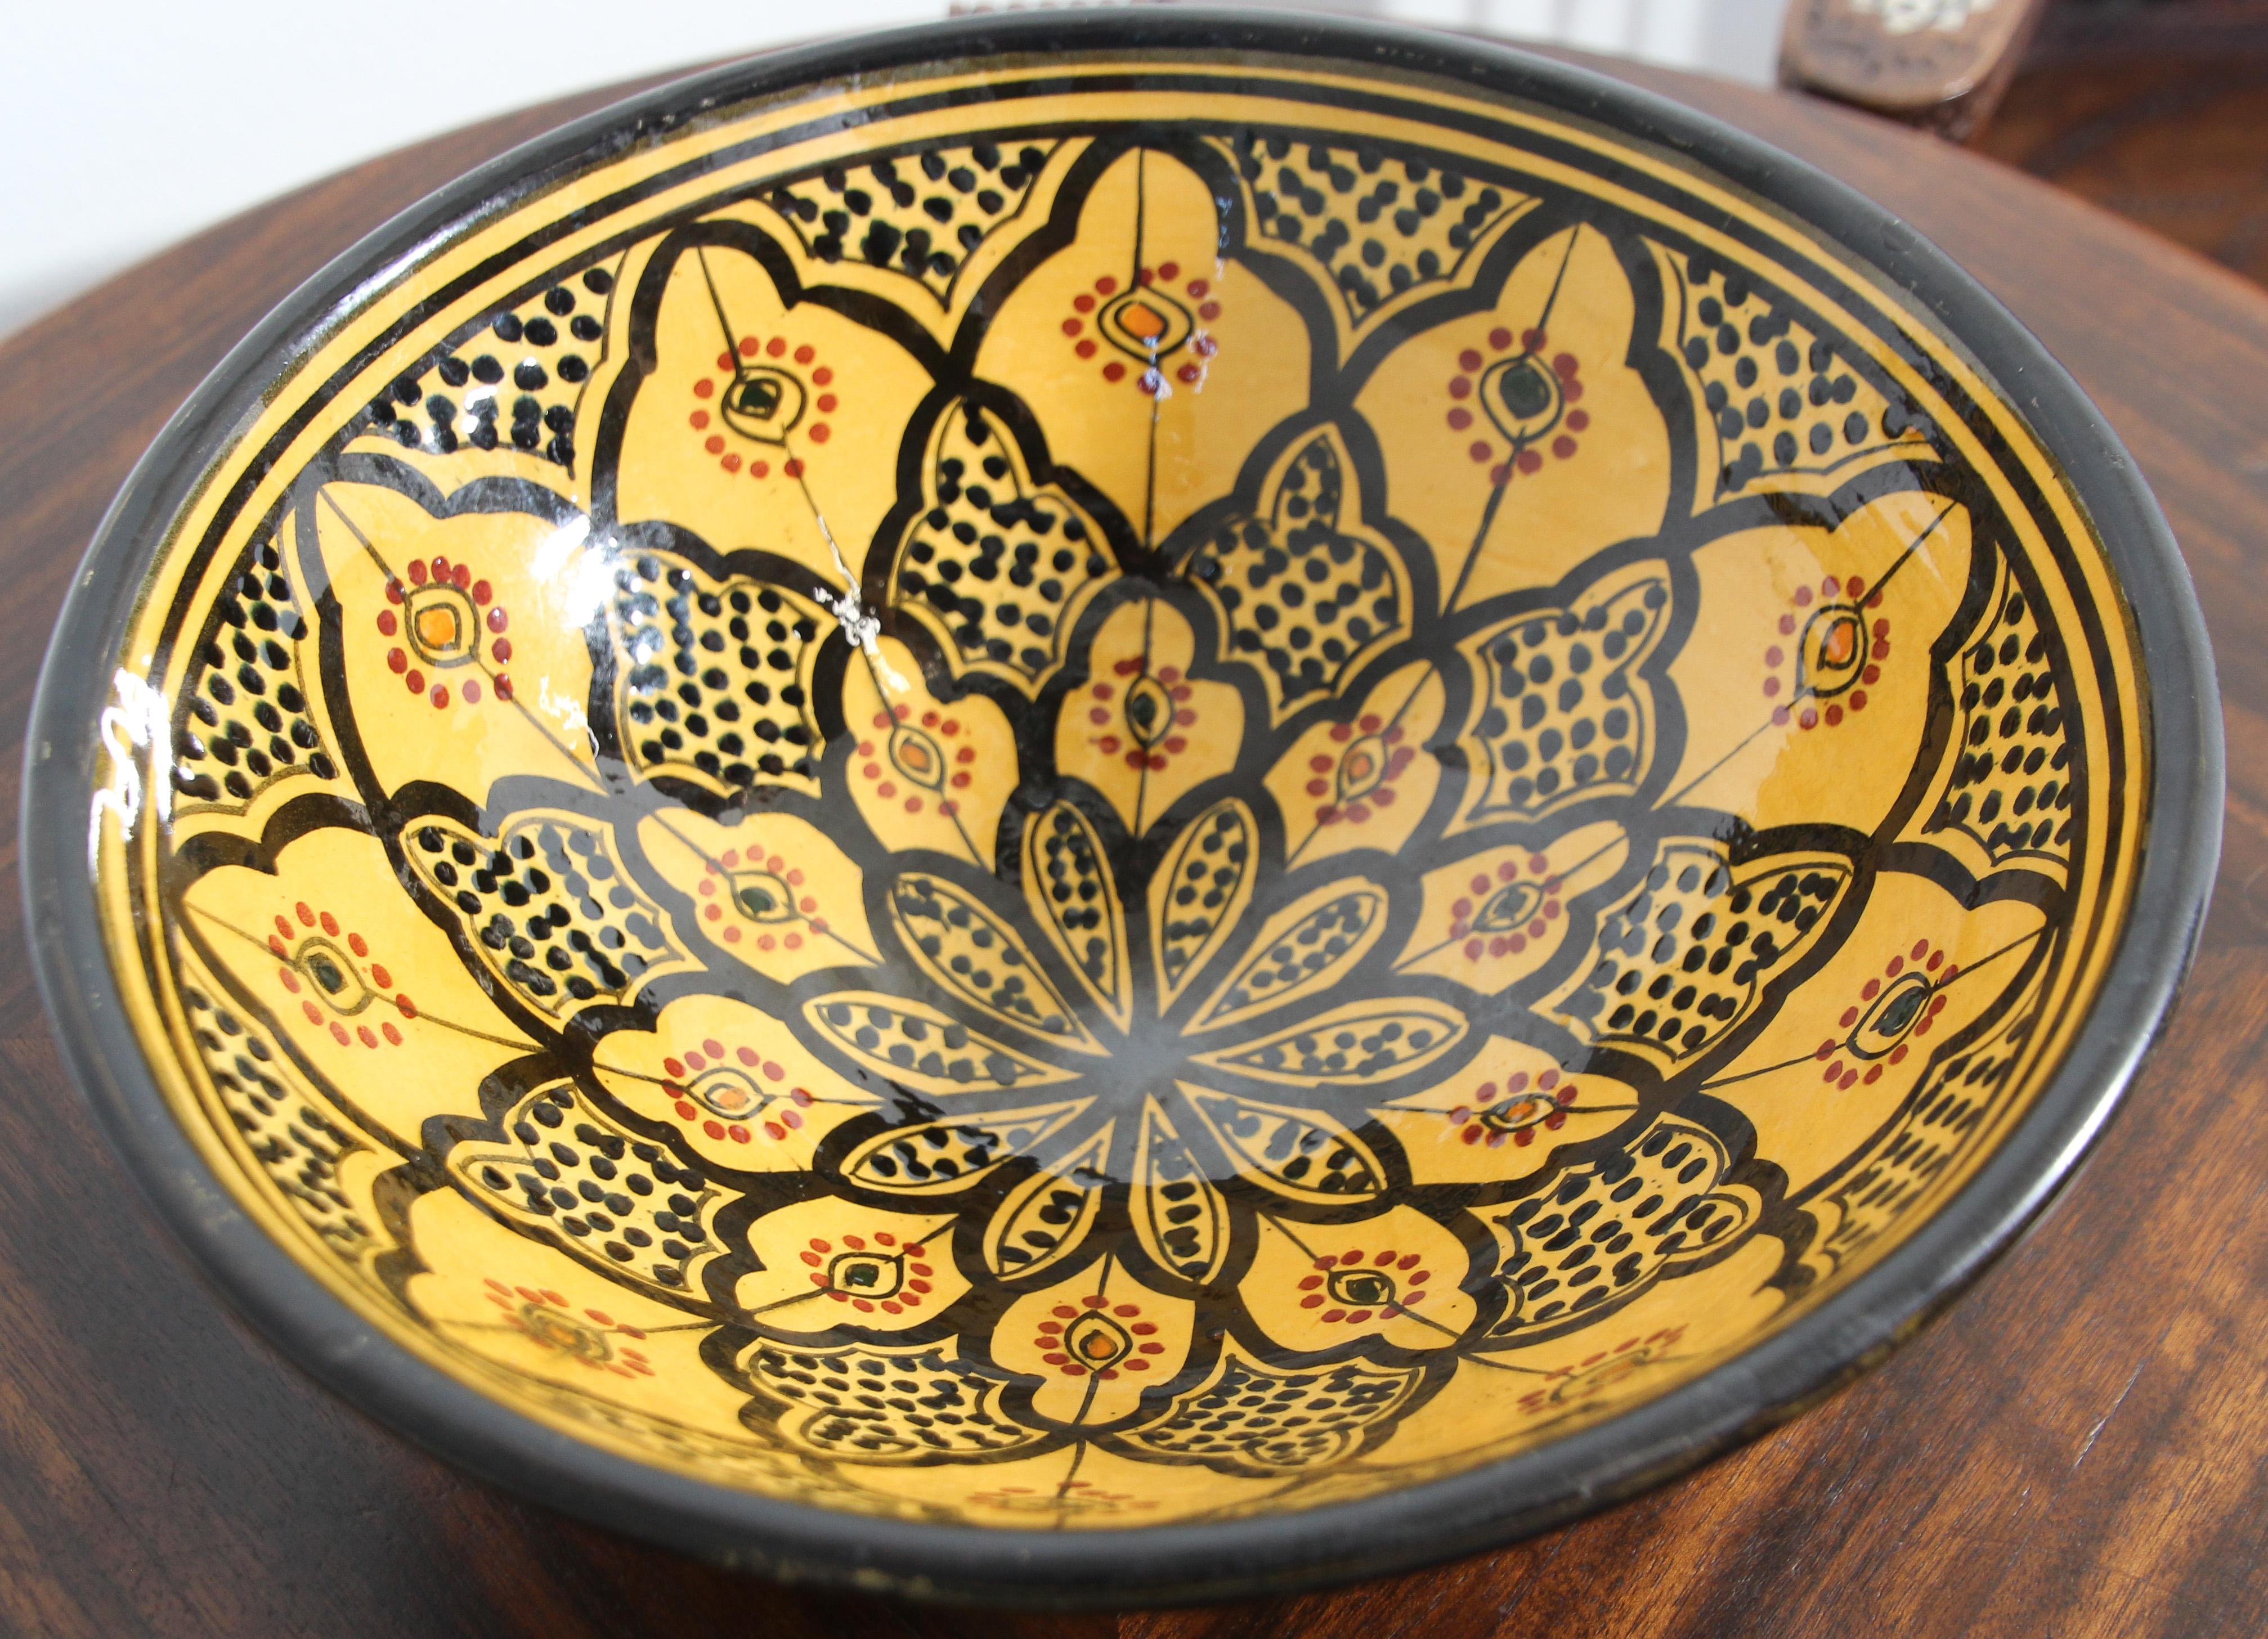 Handcrafted Moroccan hand-painted glazed ceramic decorative bowl with a yellow background and adorned with geometric black Moorish designs.
Signed in the back in Arabic “Safi